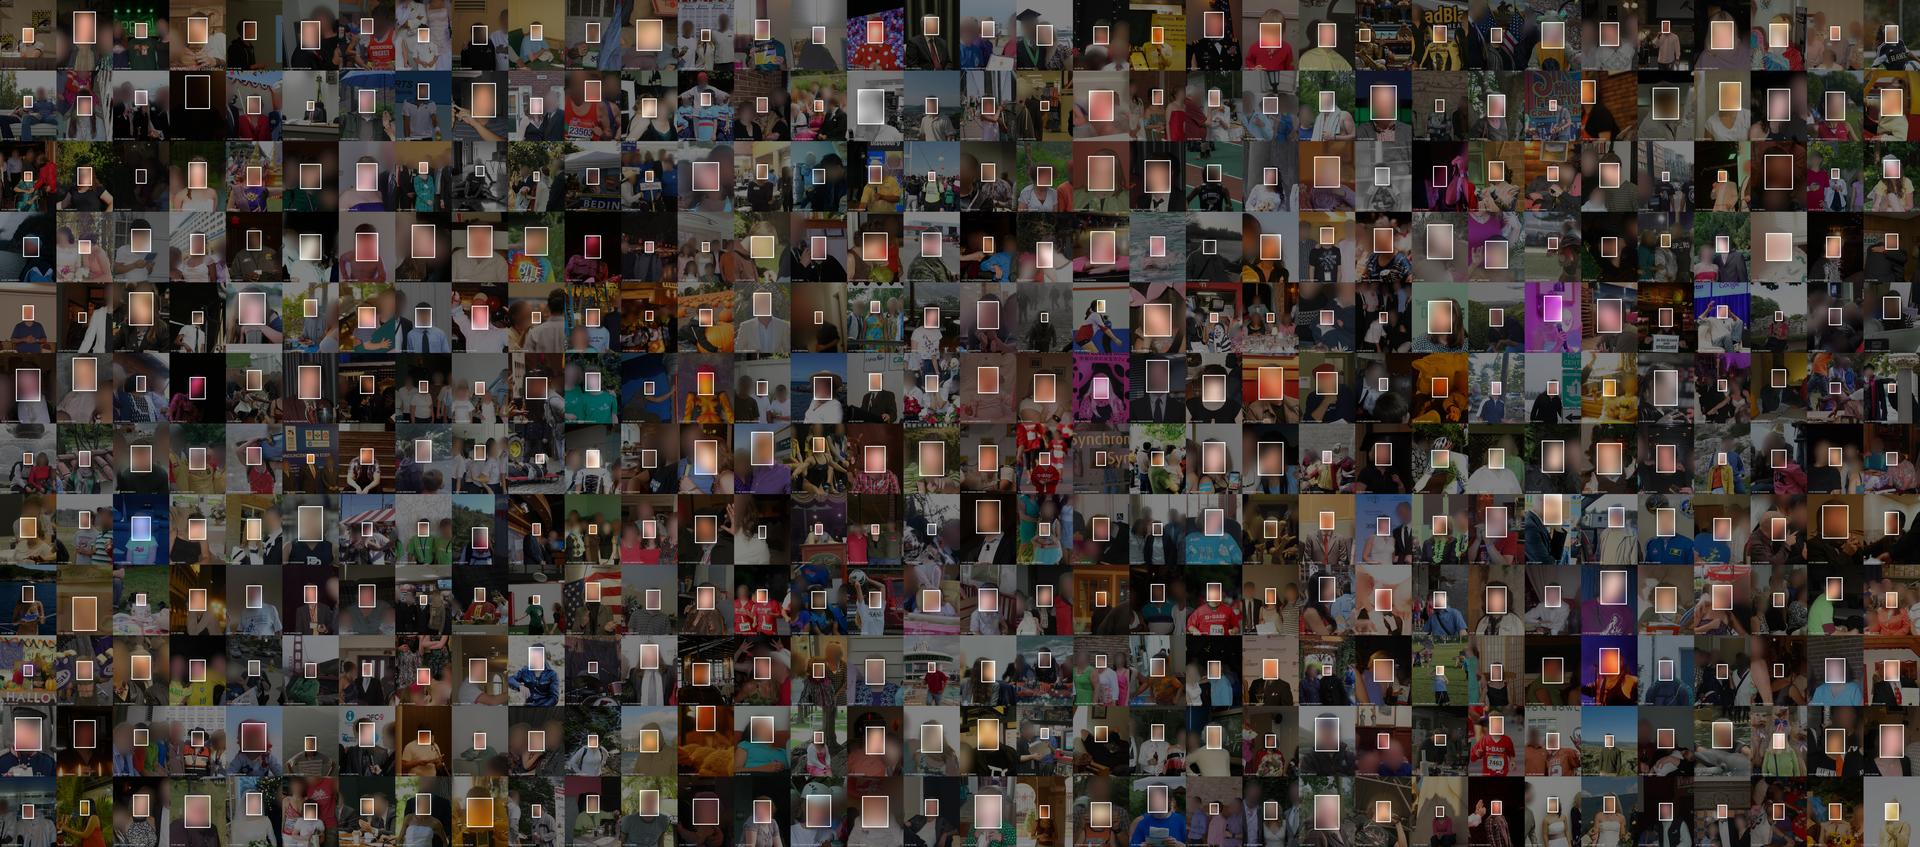 408 of about 4,753,520 face images from the MegaFace face recognition training and benchmarking dataset. Faces are blurred to protect privacy. Visualization by Adam Harvey / Exposing.ai licensed under CC-BY-NC with original images licensed and attributed under Creative Commons CC-BY.